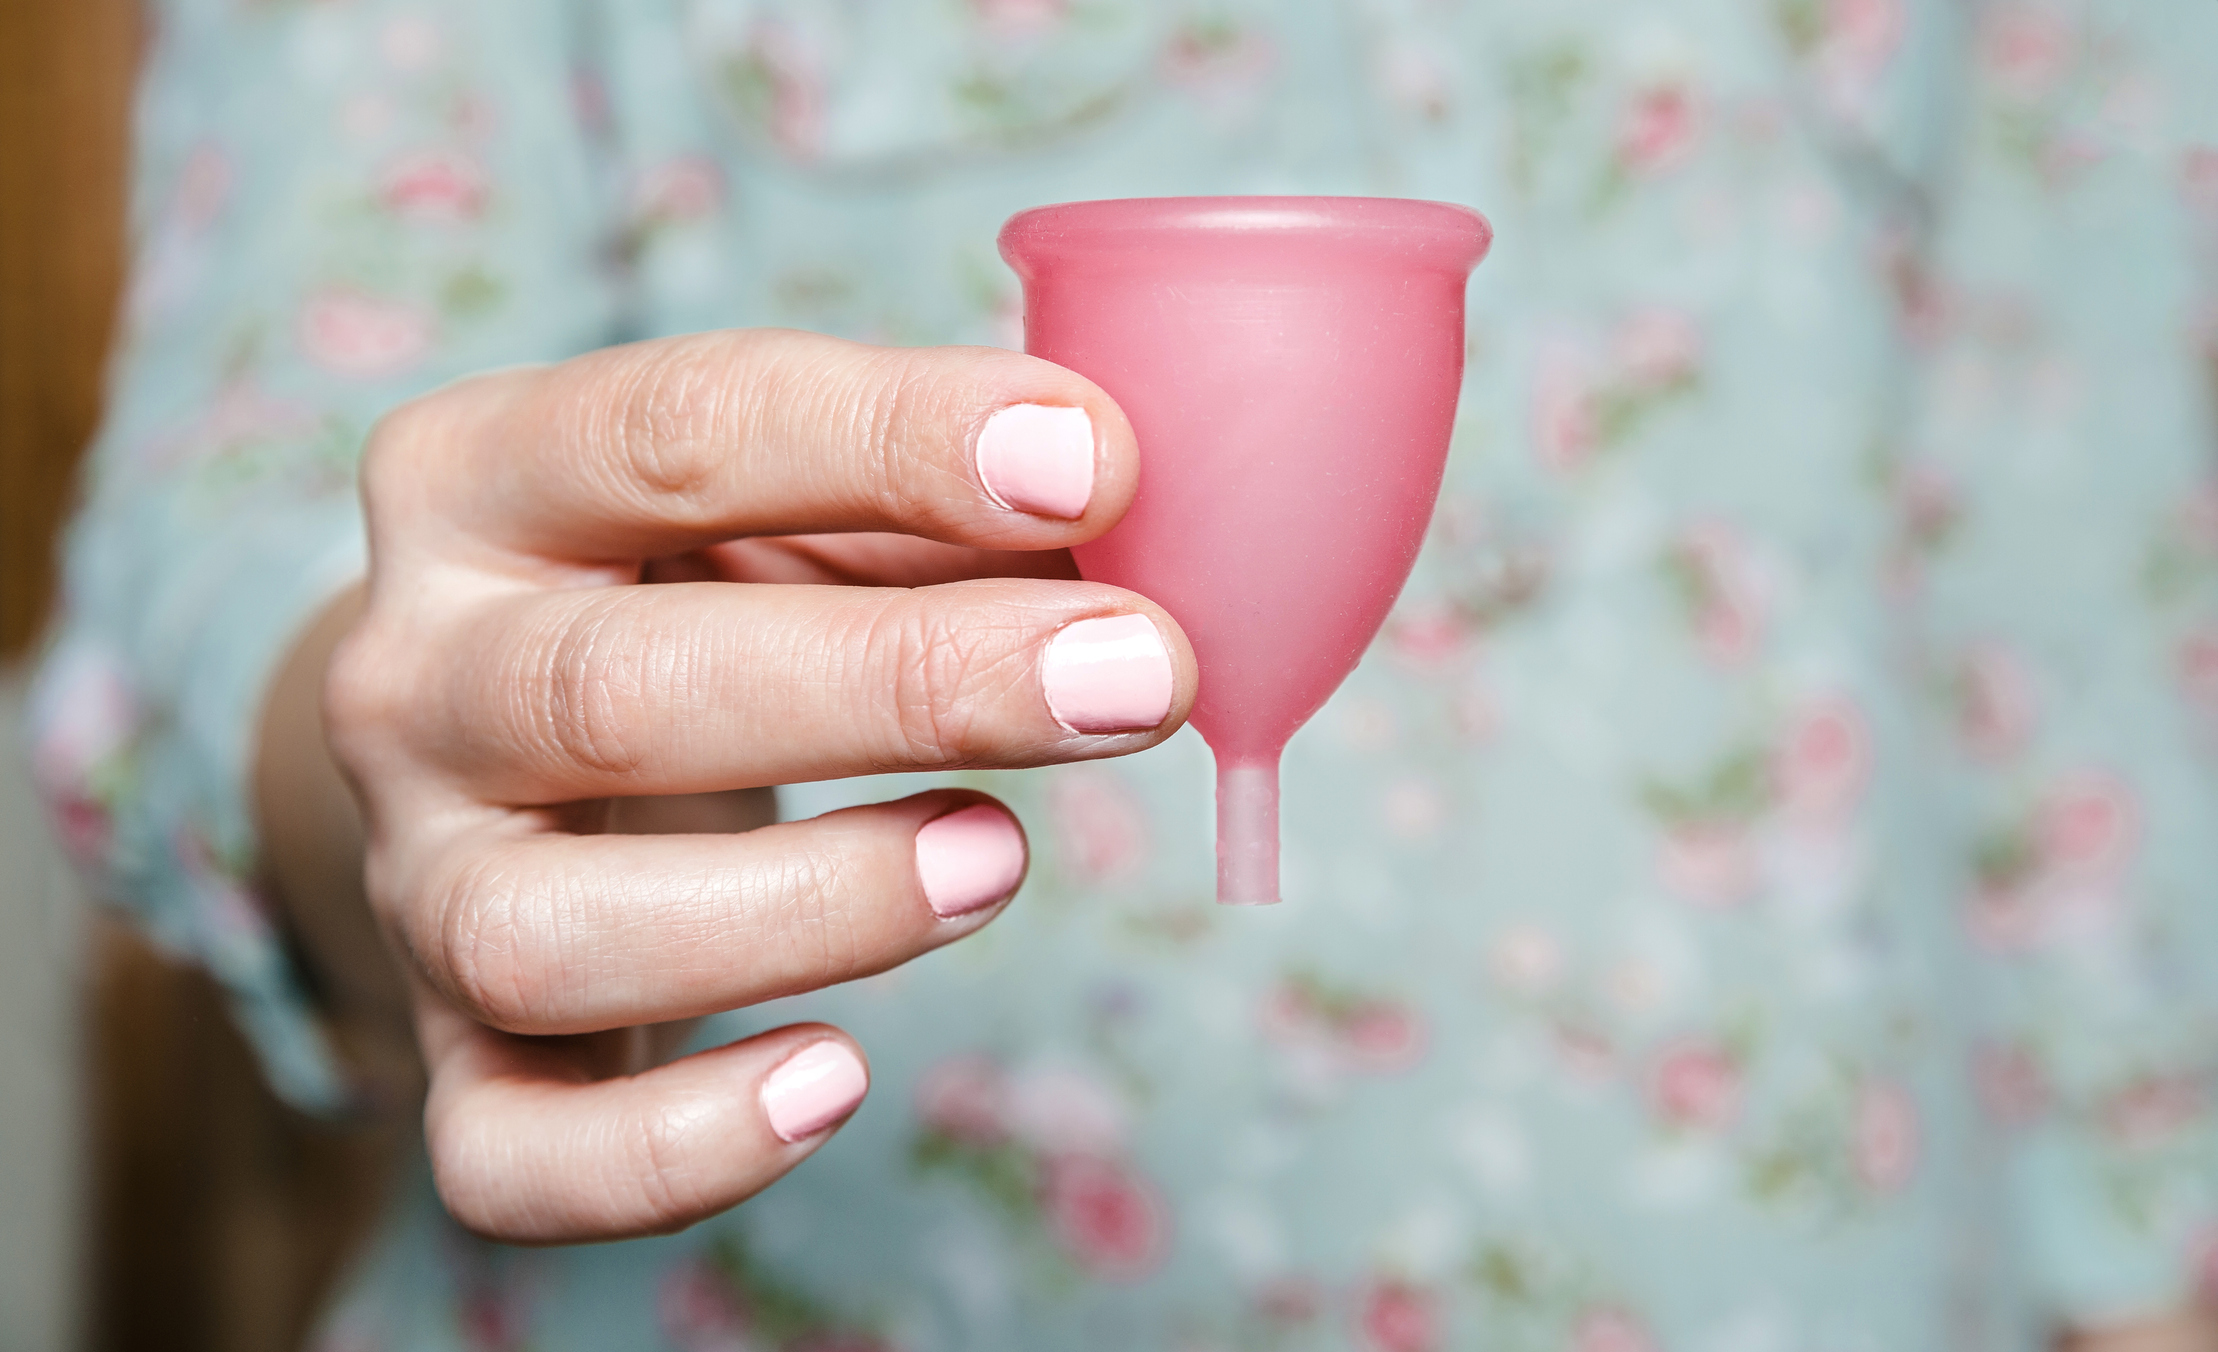 Menstrual cups are just as safe as tampons — here's how they work